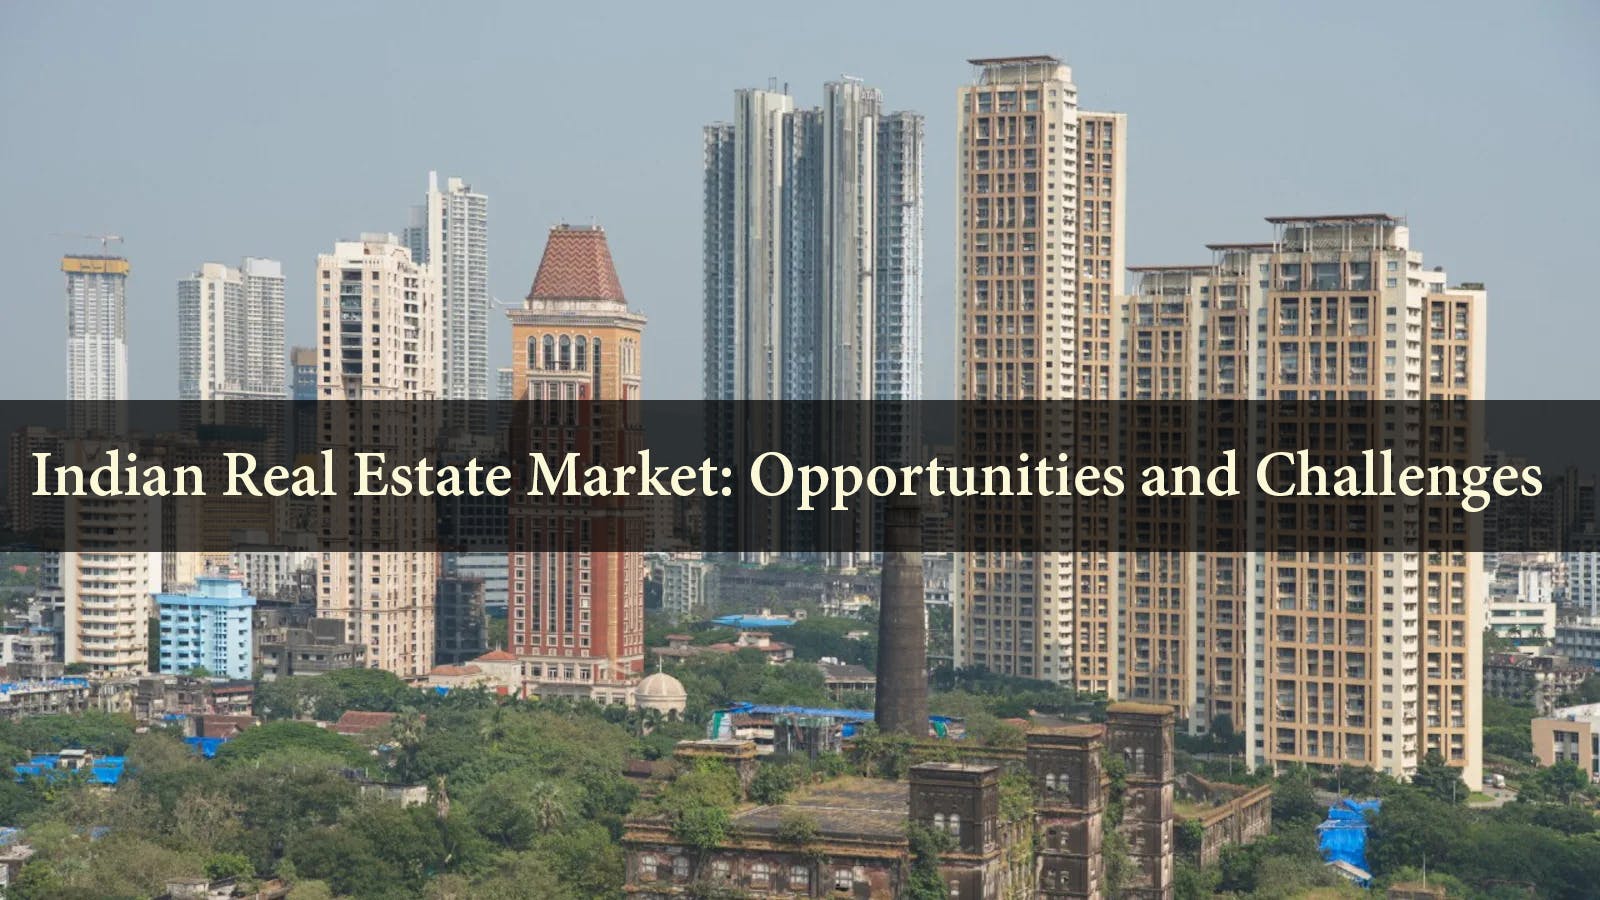 Indian Real Estate Market: Opportunities and Challenges